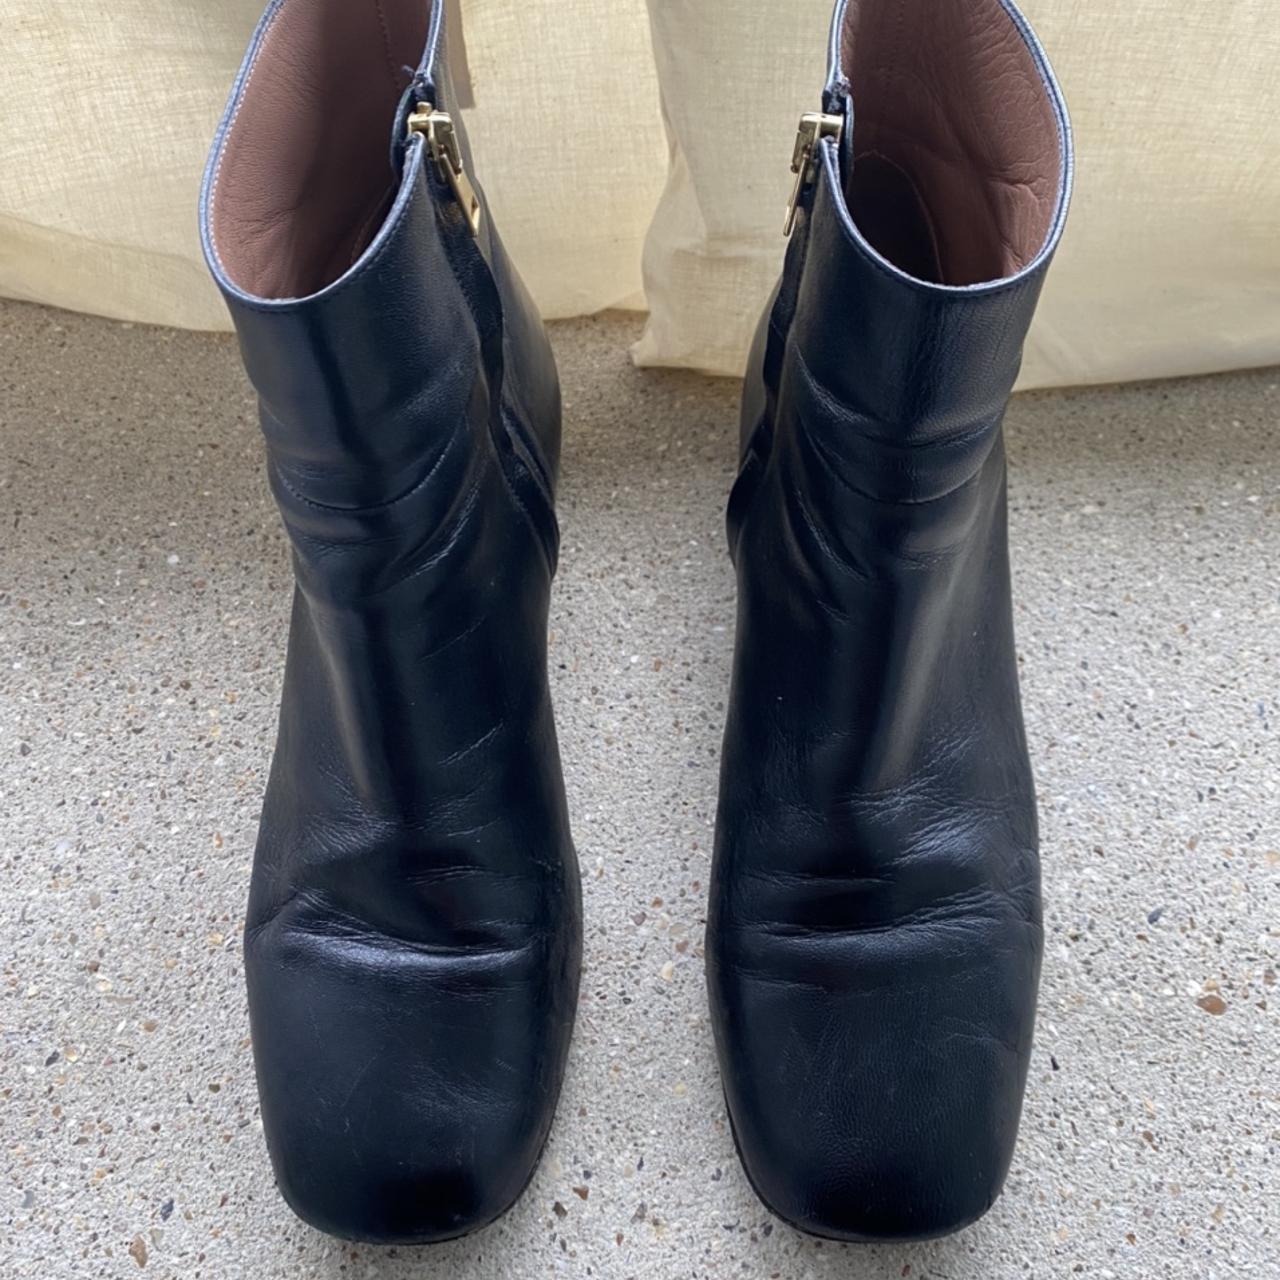 Marni Square Toe and Square Heel Boots Black leather... - Depop